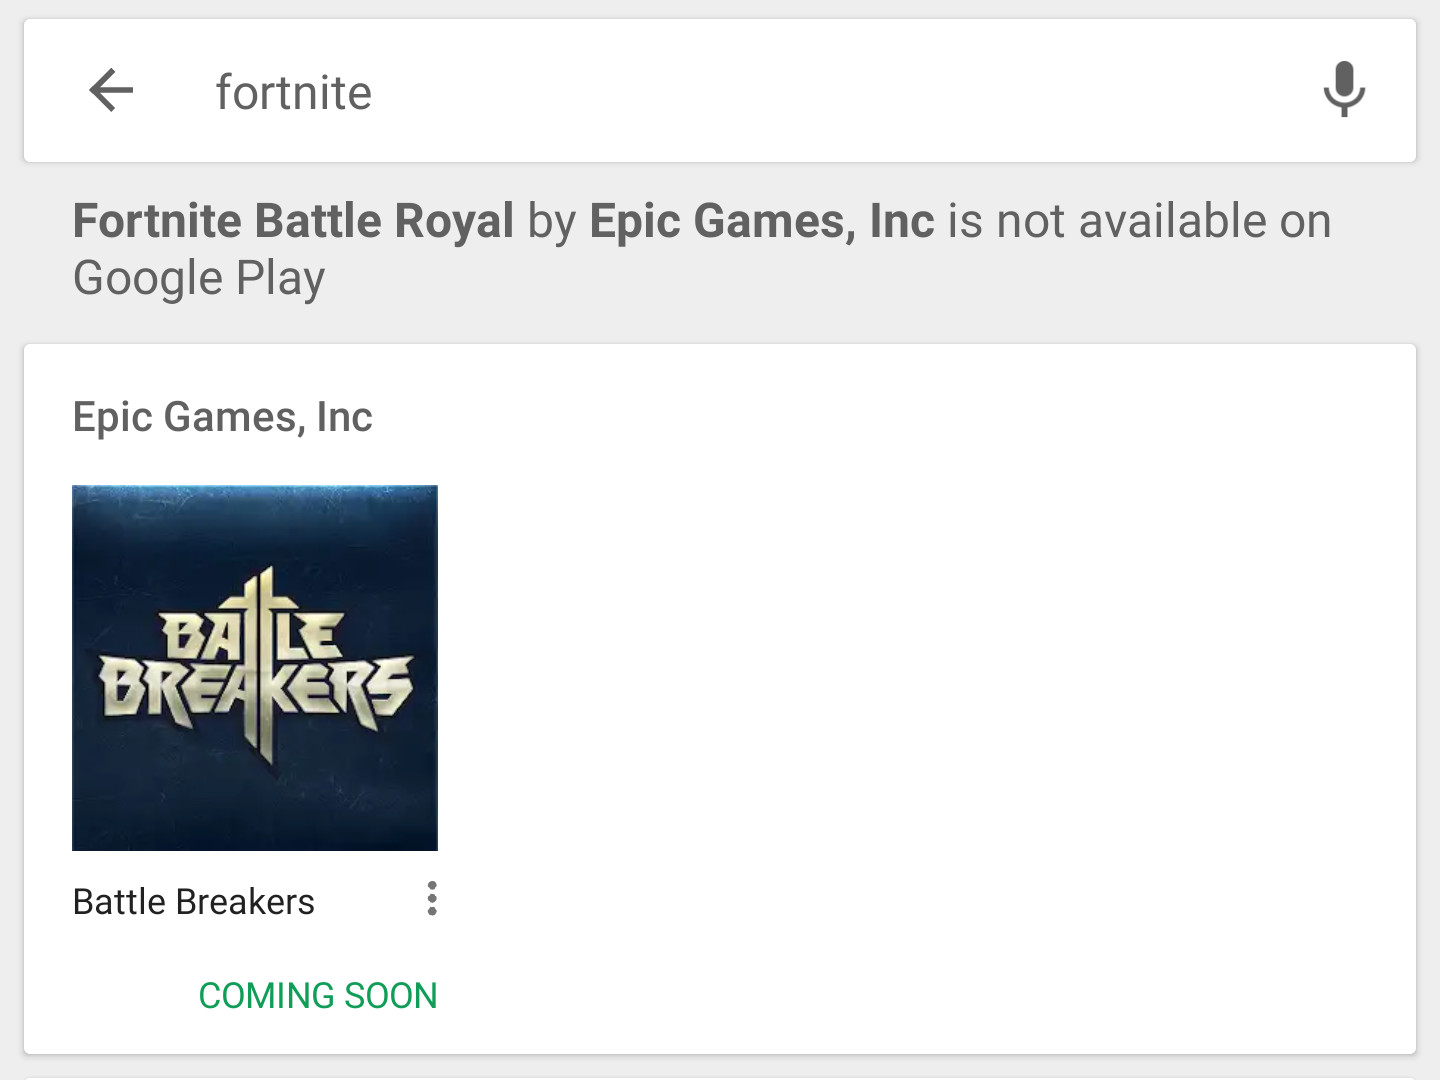 A screenshot of the warning one see when searching for Fortnite on the Google Play Store.